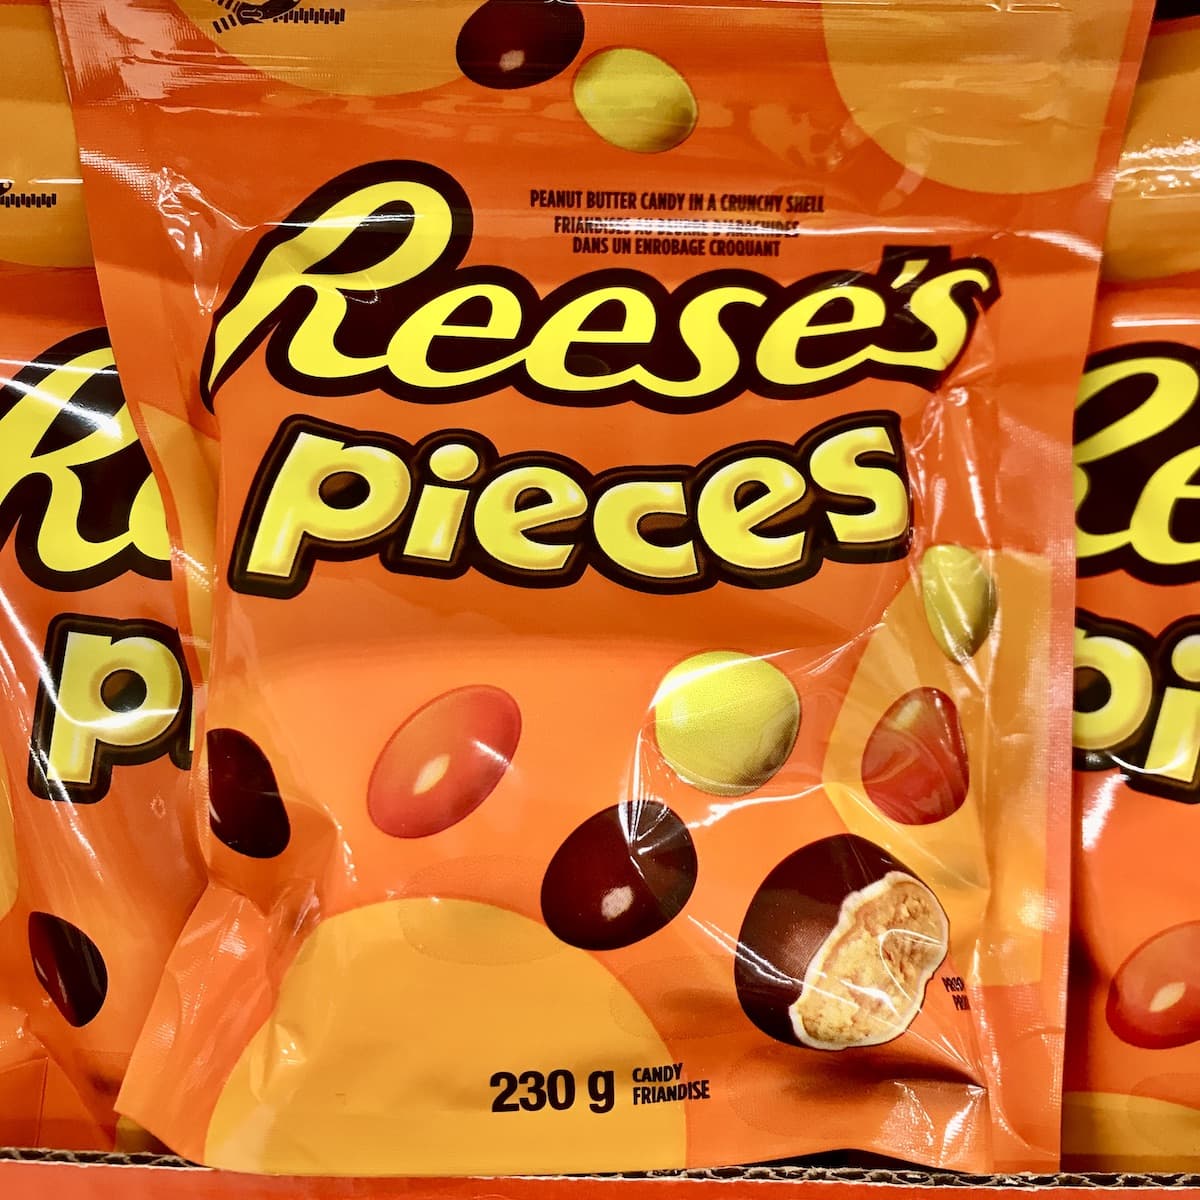 A package of Reese's Pieces.